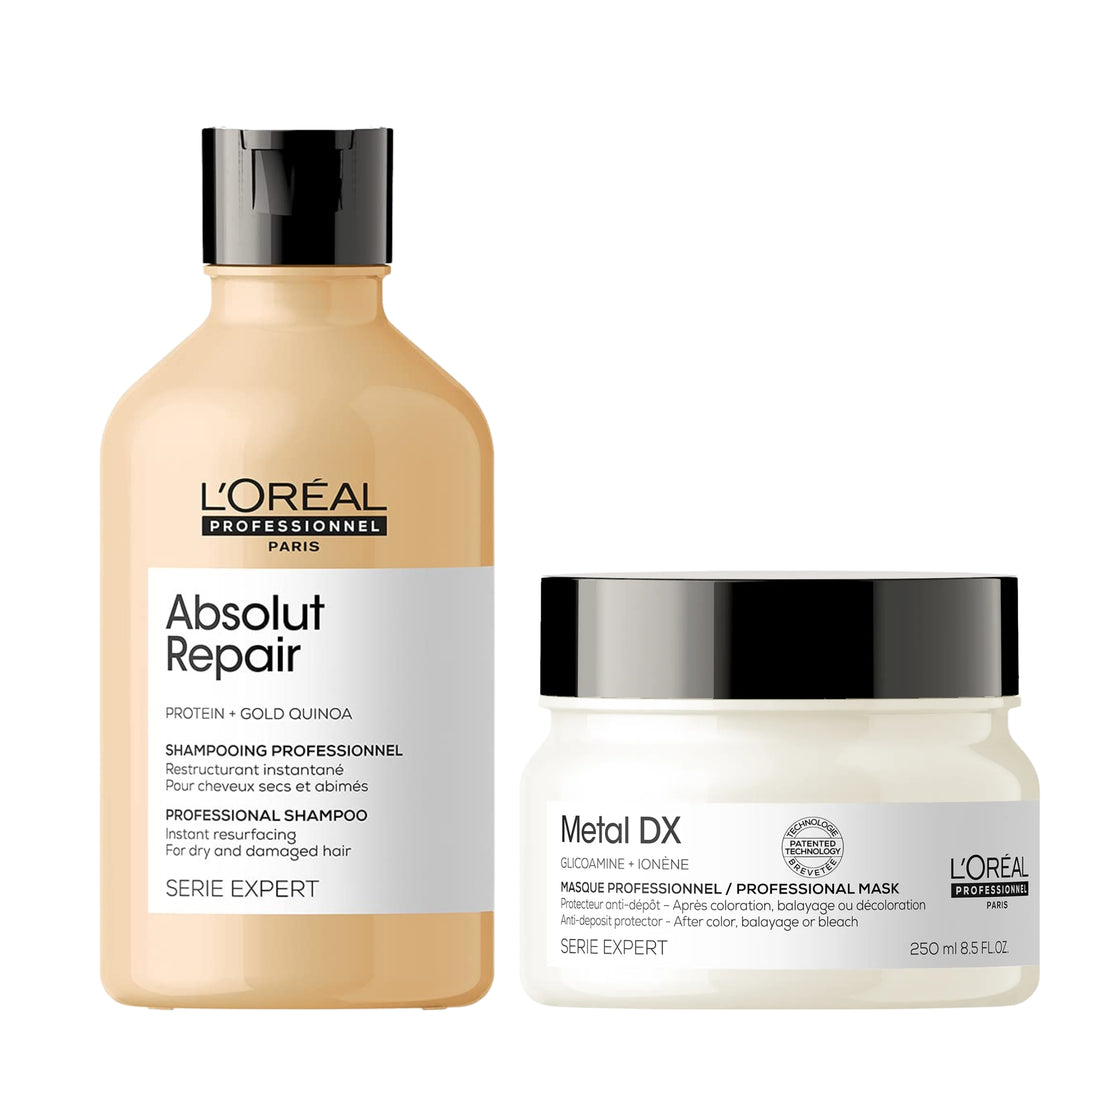 Loreal Professionnel Absolut Repair Shampoo 300ml and Metal Dx Combo Pack of 2